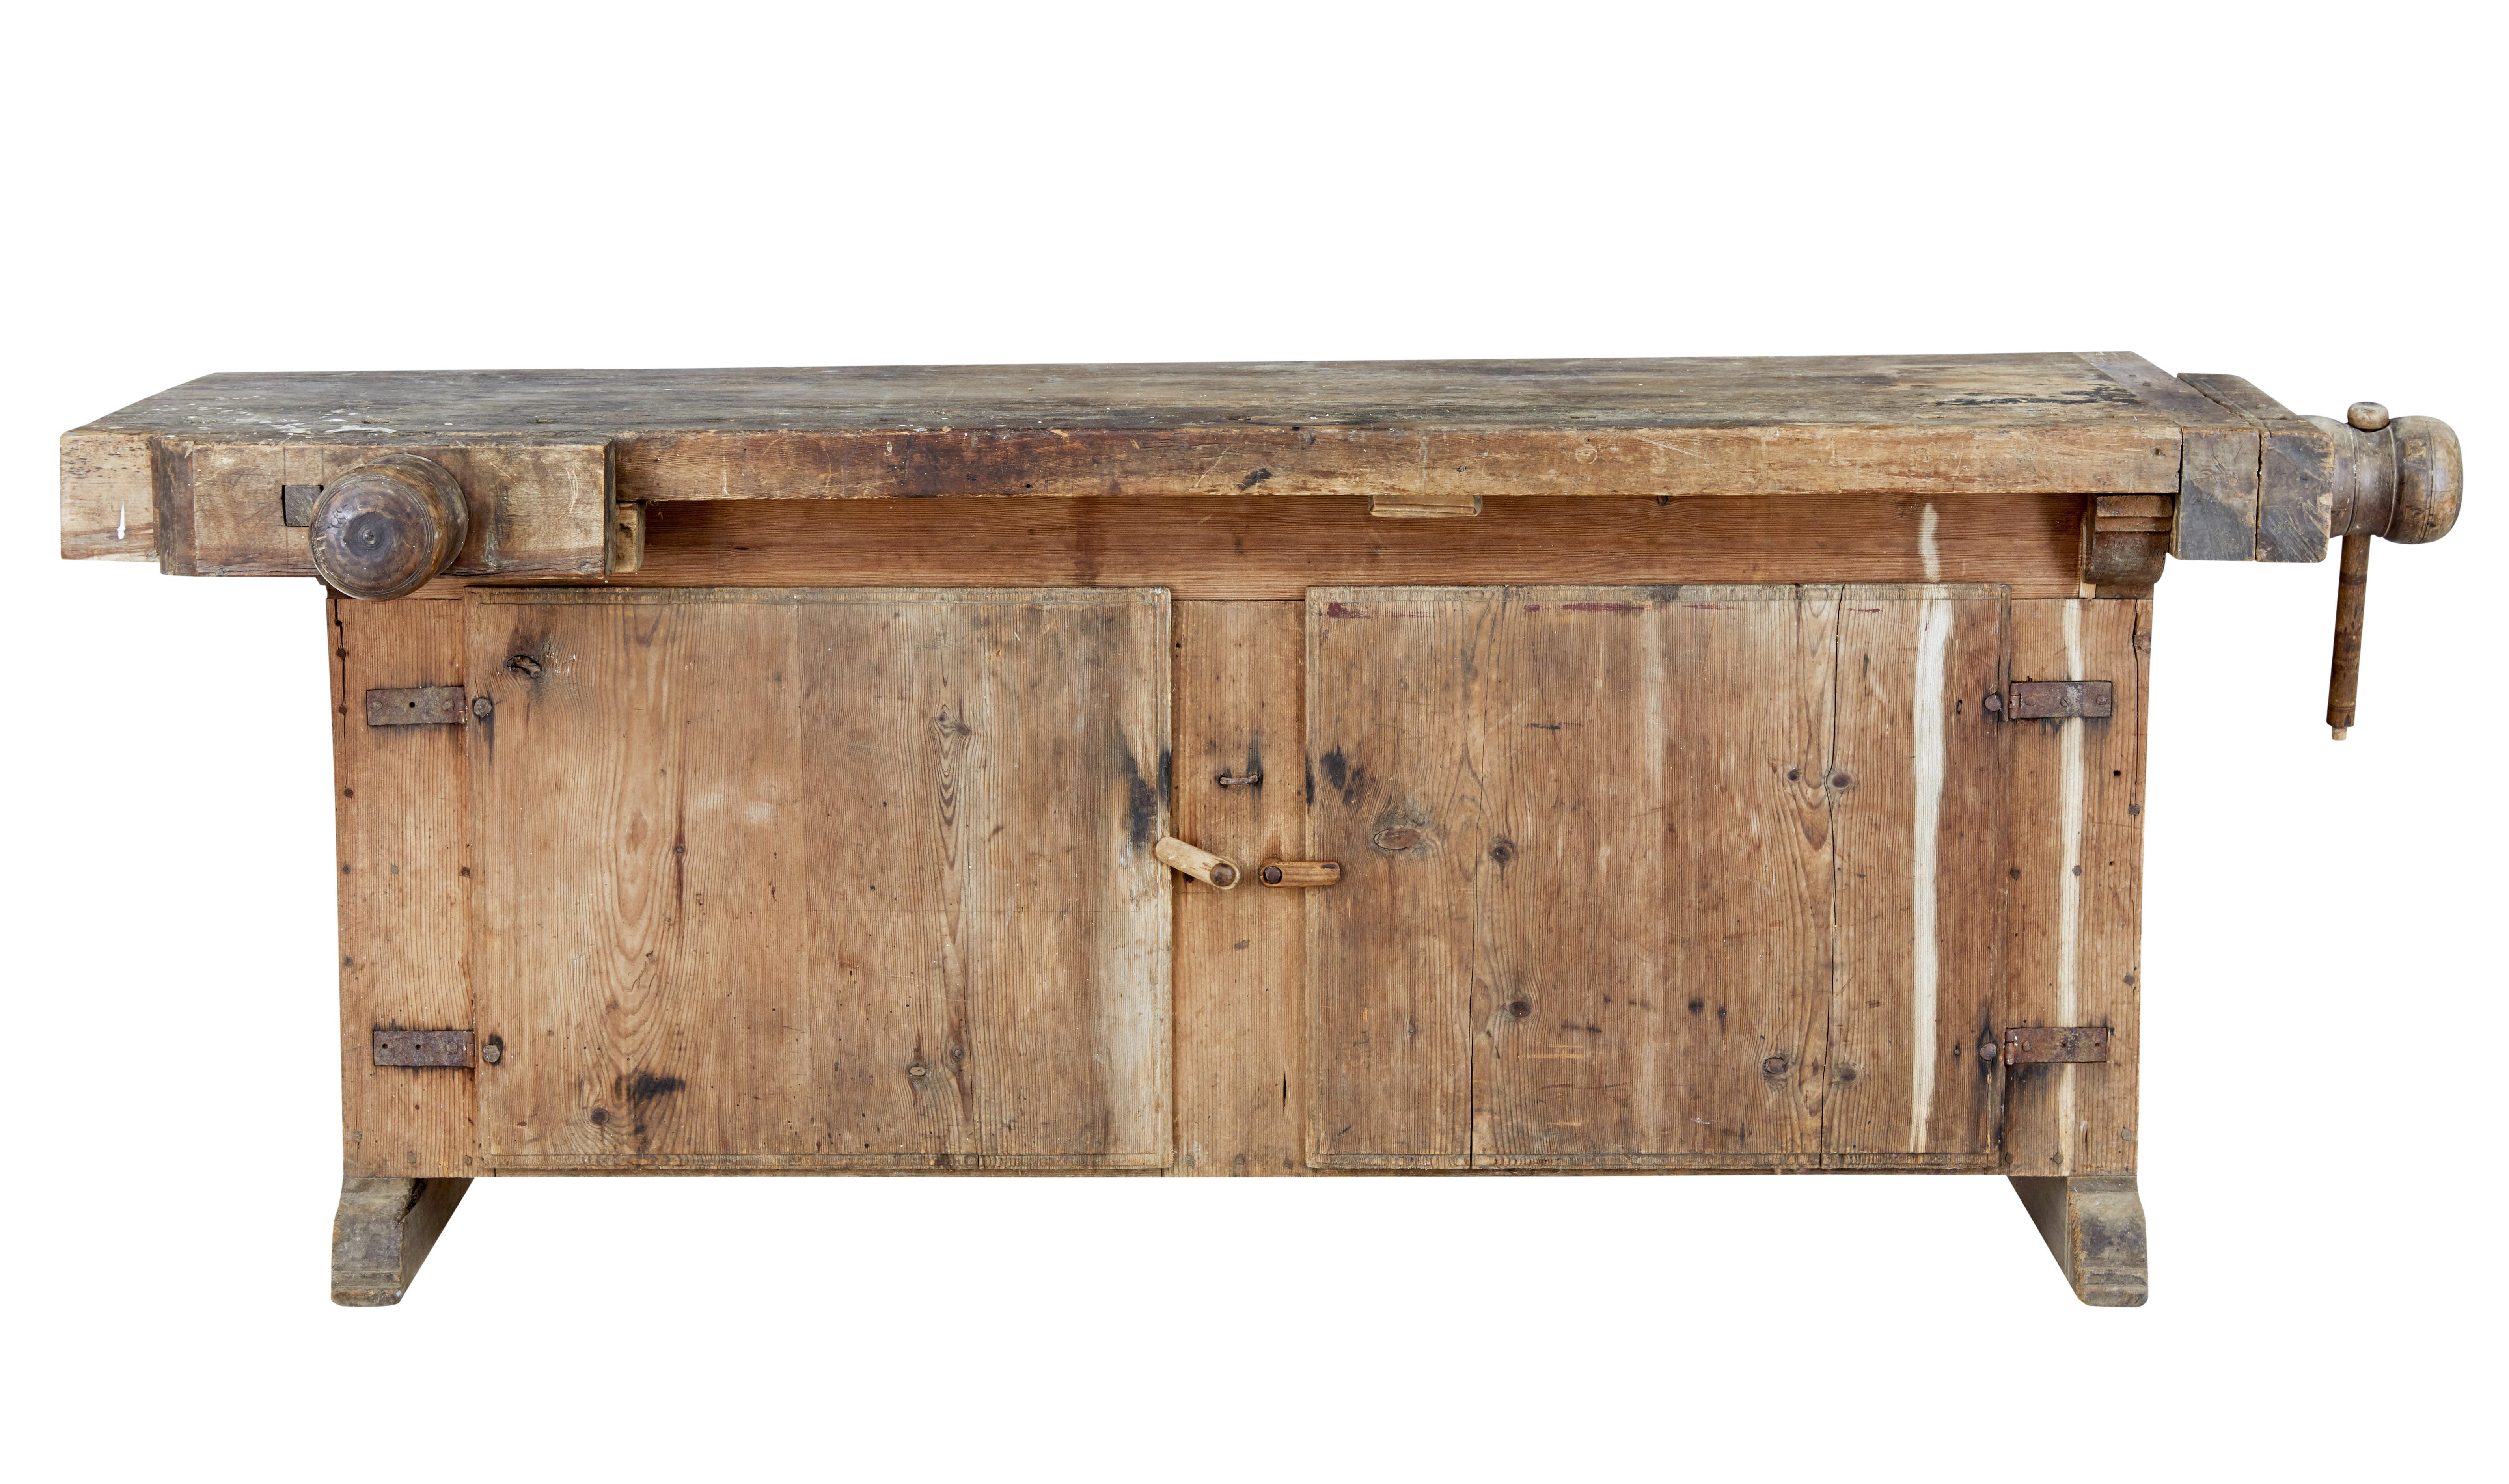 Unusual 19th century pine sideboard workbench, circa 1880.

Fantastic opportunity to own a rustic workbench and become a unique installation sideboard. Double clamp workbench with clamps to the front and side.

Top sits on a cupboard base,